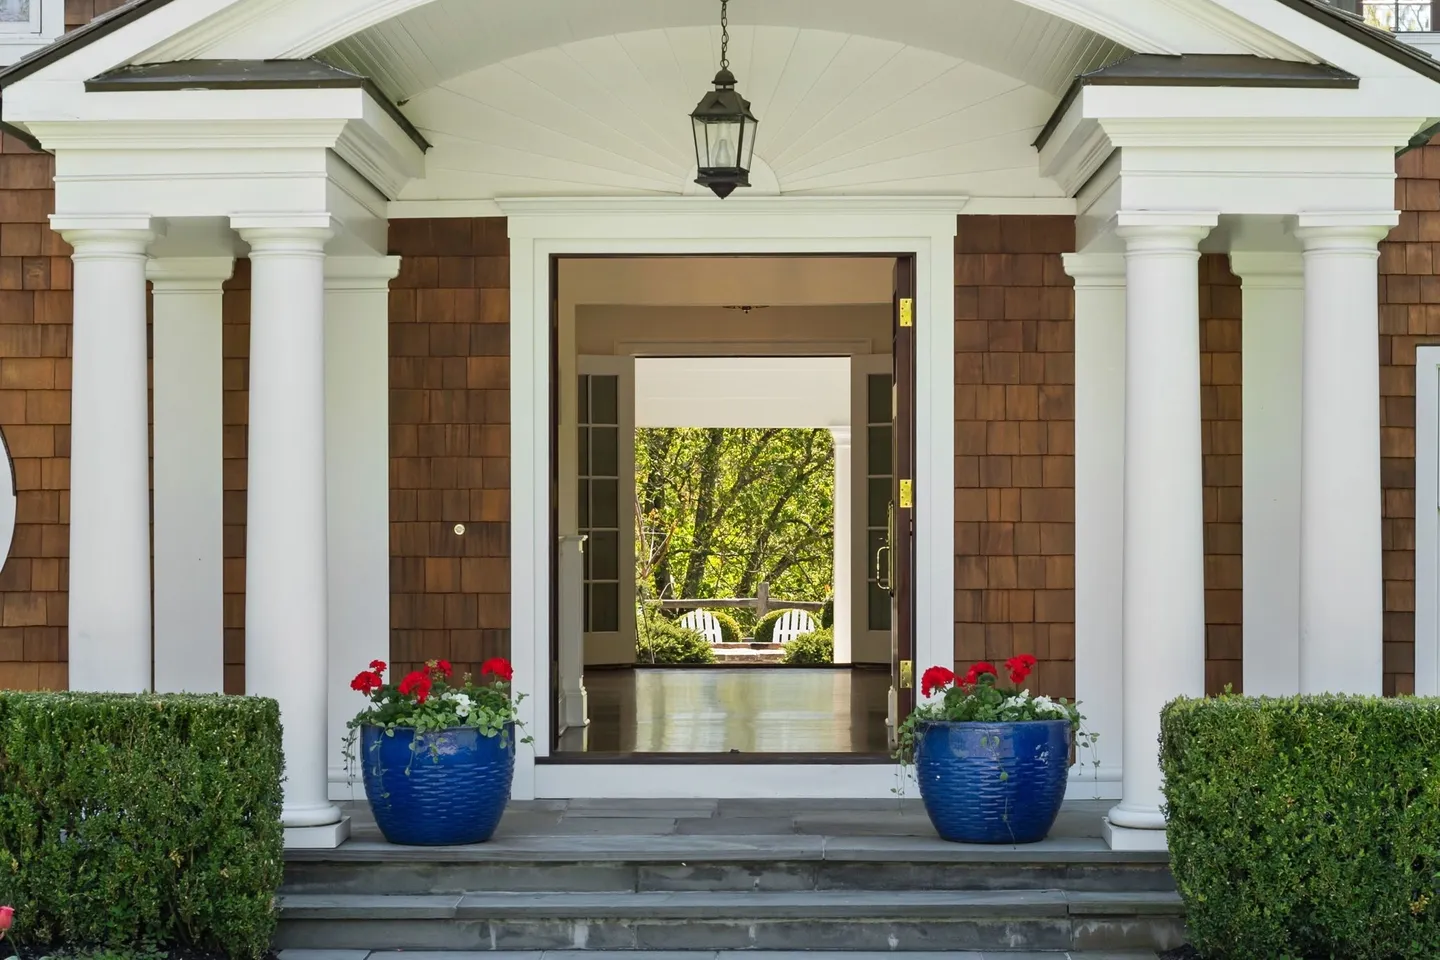 A front porch with two large blue pots on the steps.